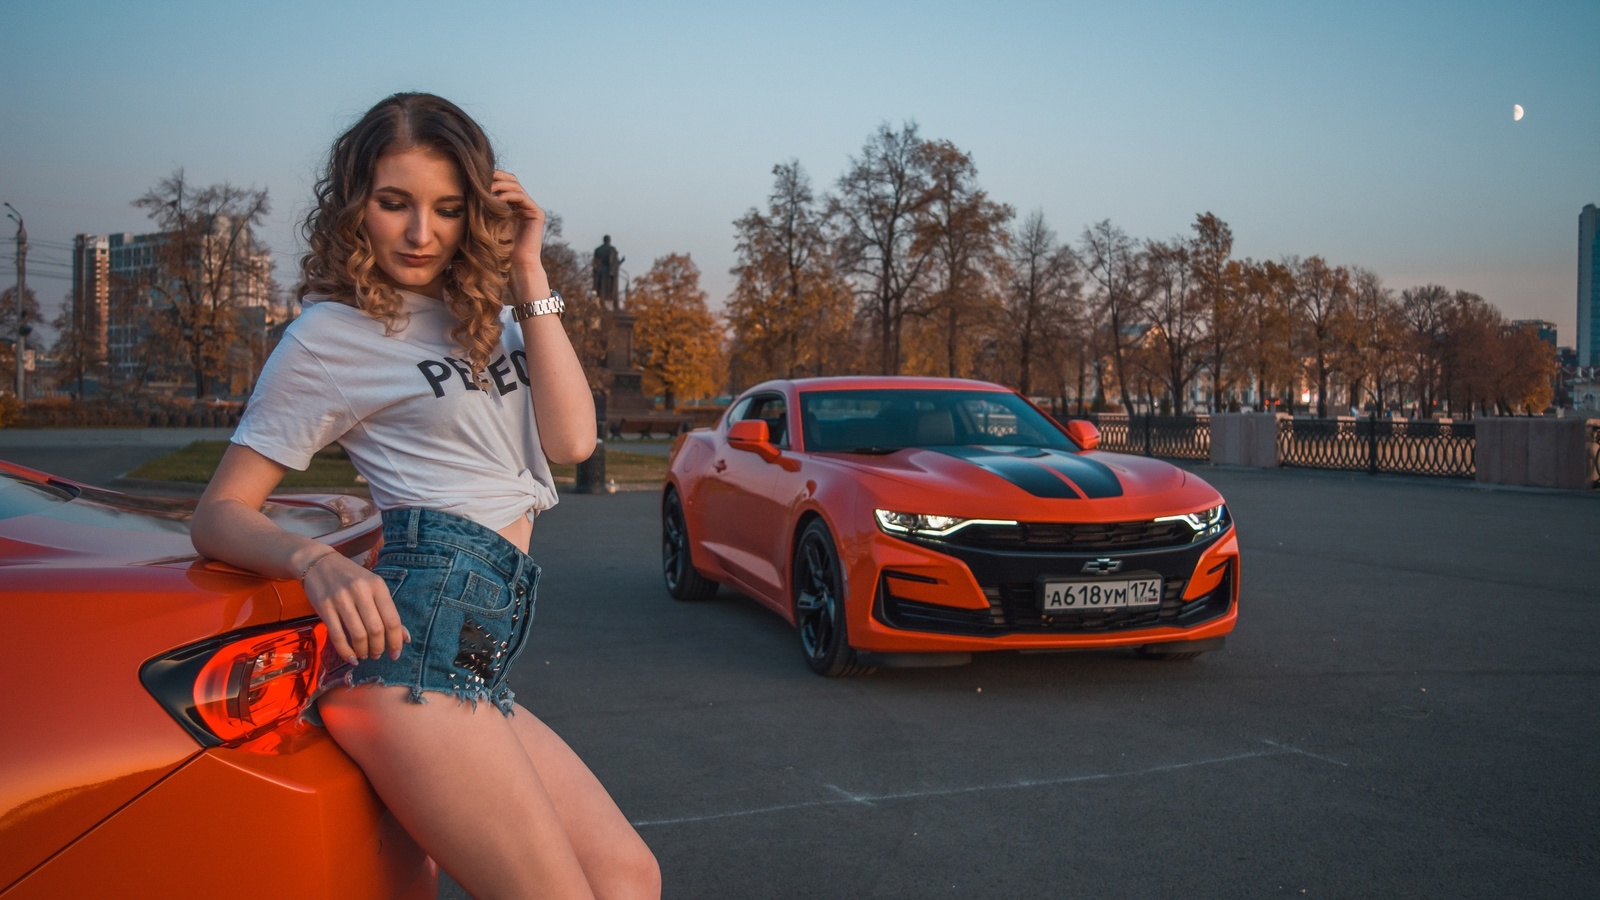 women, women with cars, curly hair, trees, sky, women outdoors, building, white t-shirt, watch, moon, chevrolet